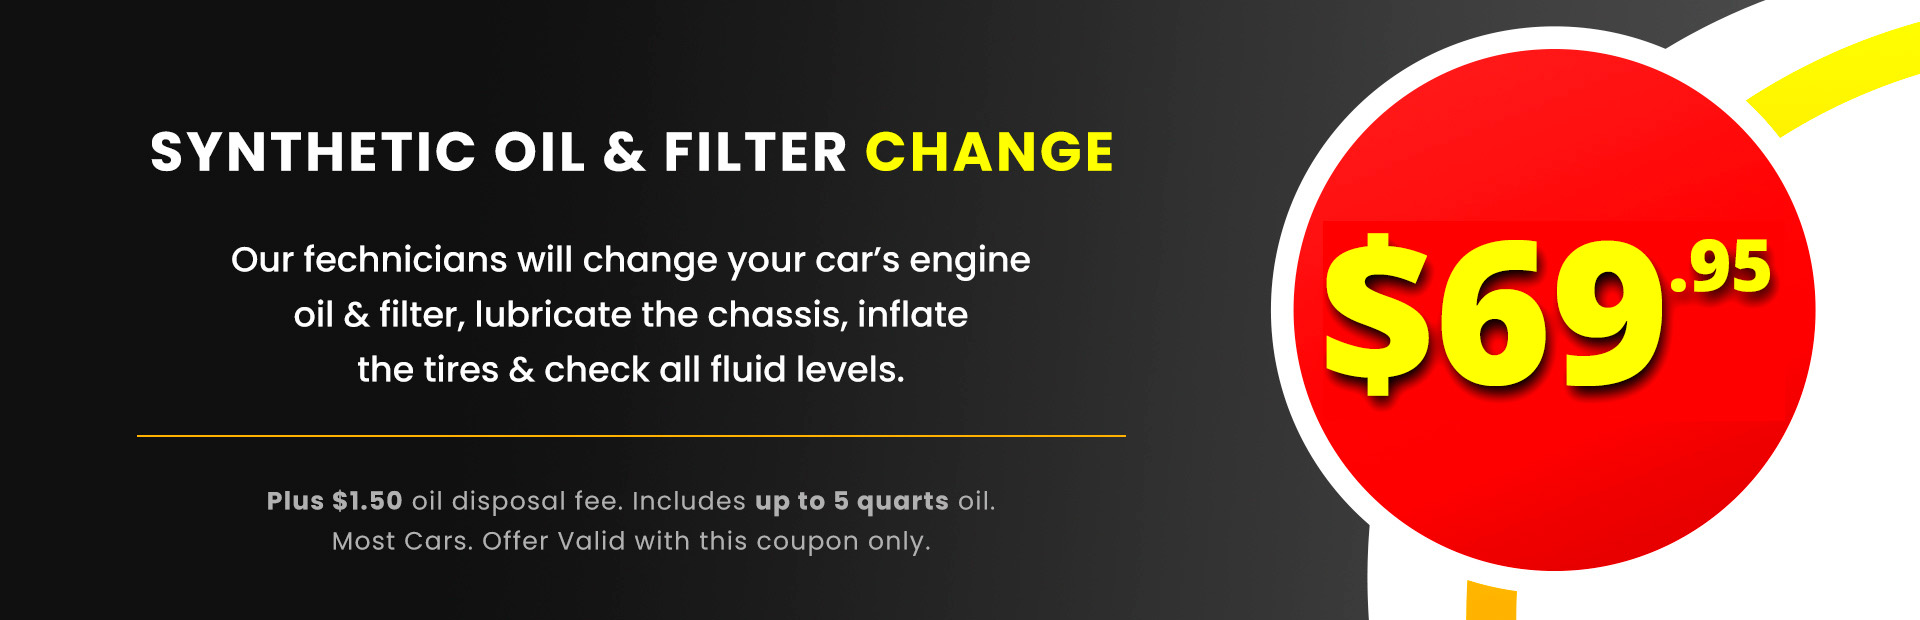 Synthetic Oil & Filter Change